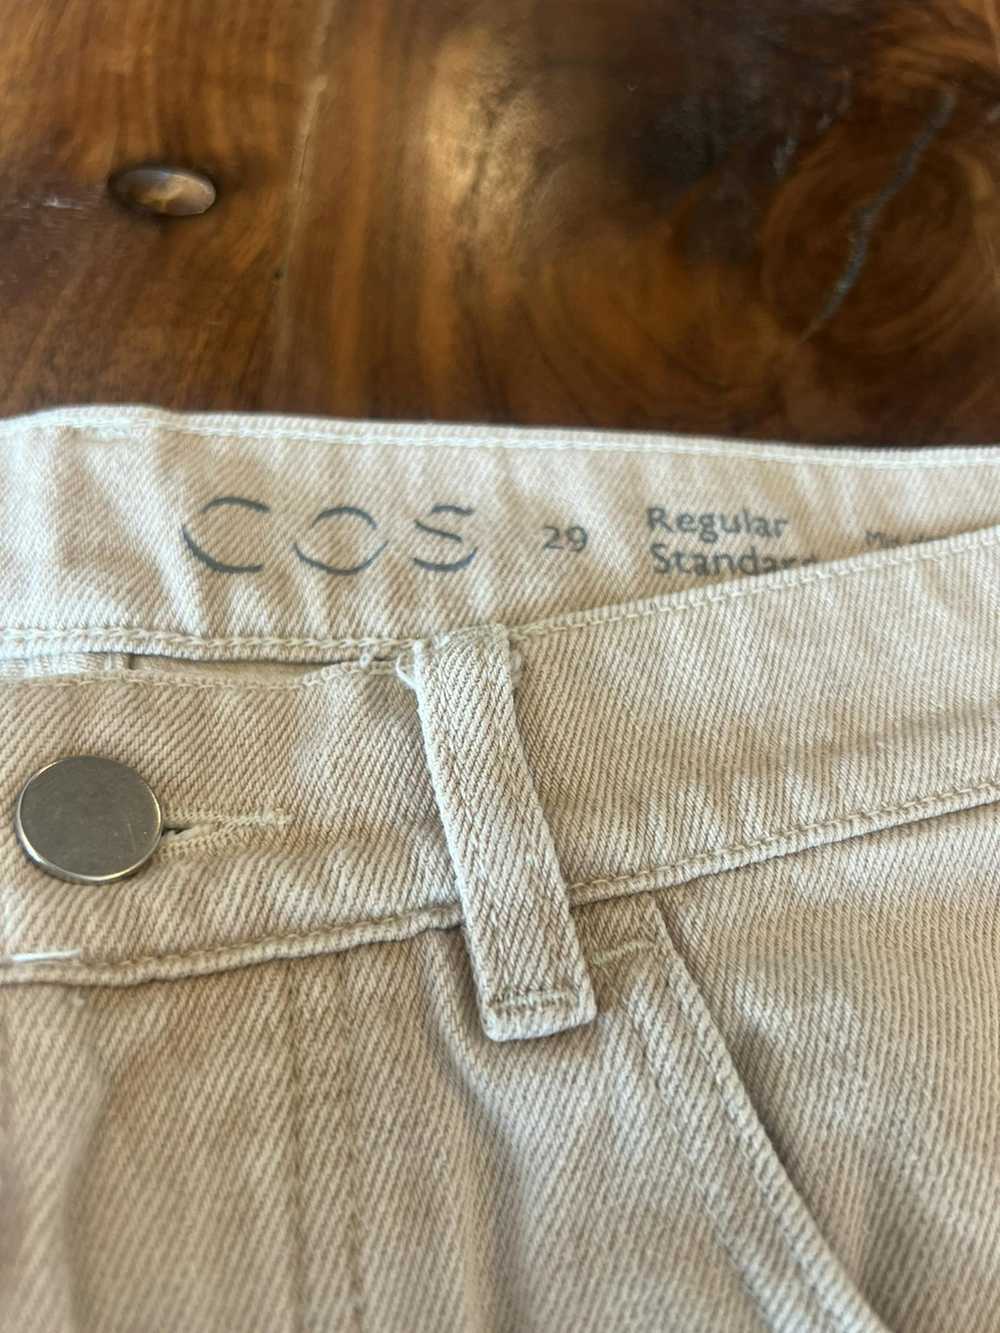 Cos COS - Regular / Standard Mid Rise Jeans - image 4